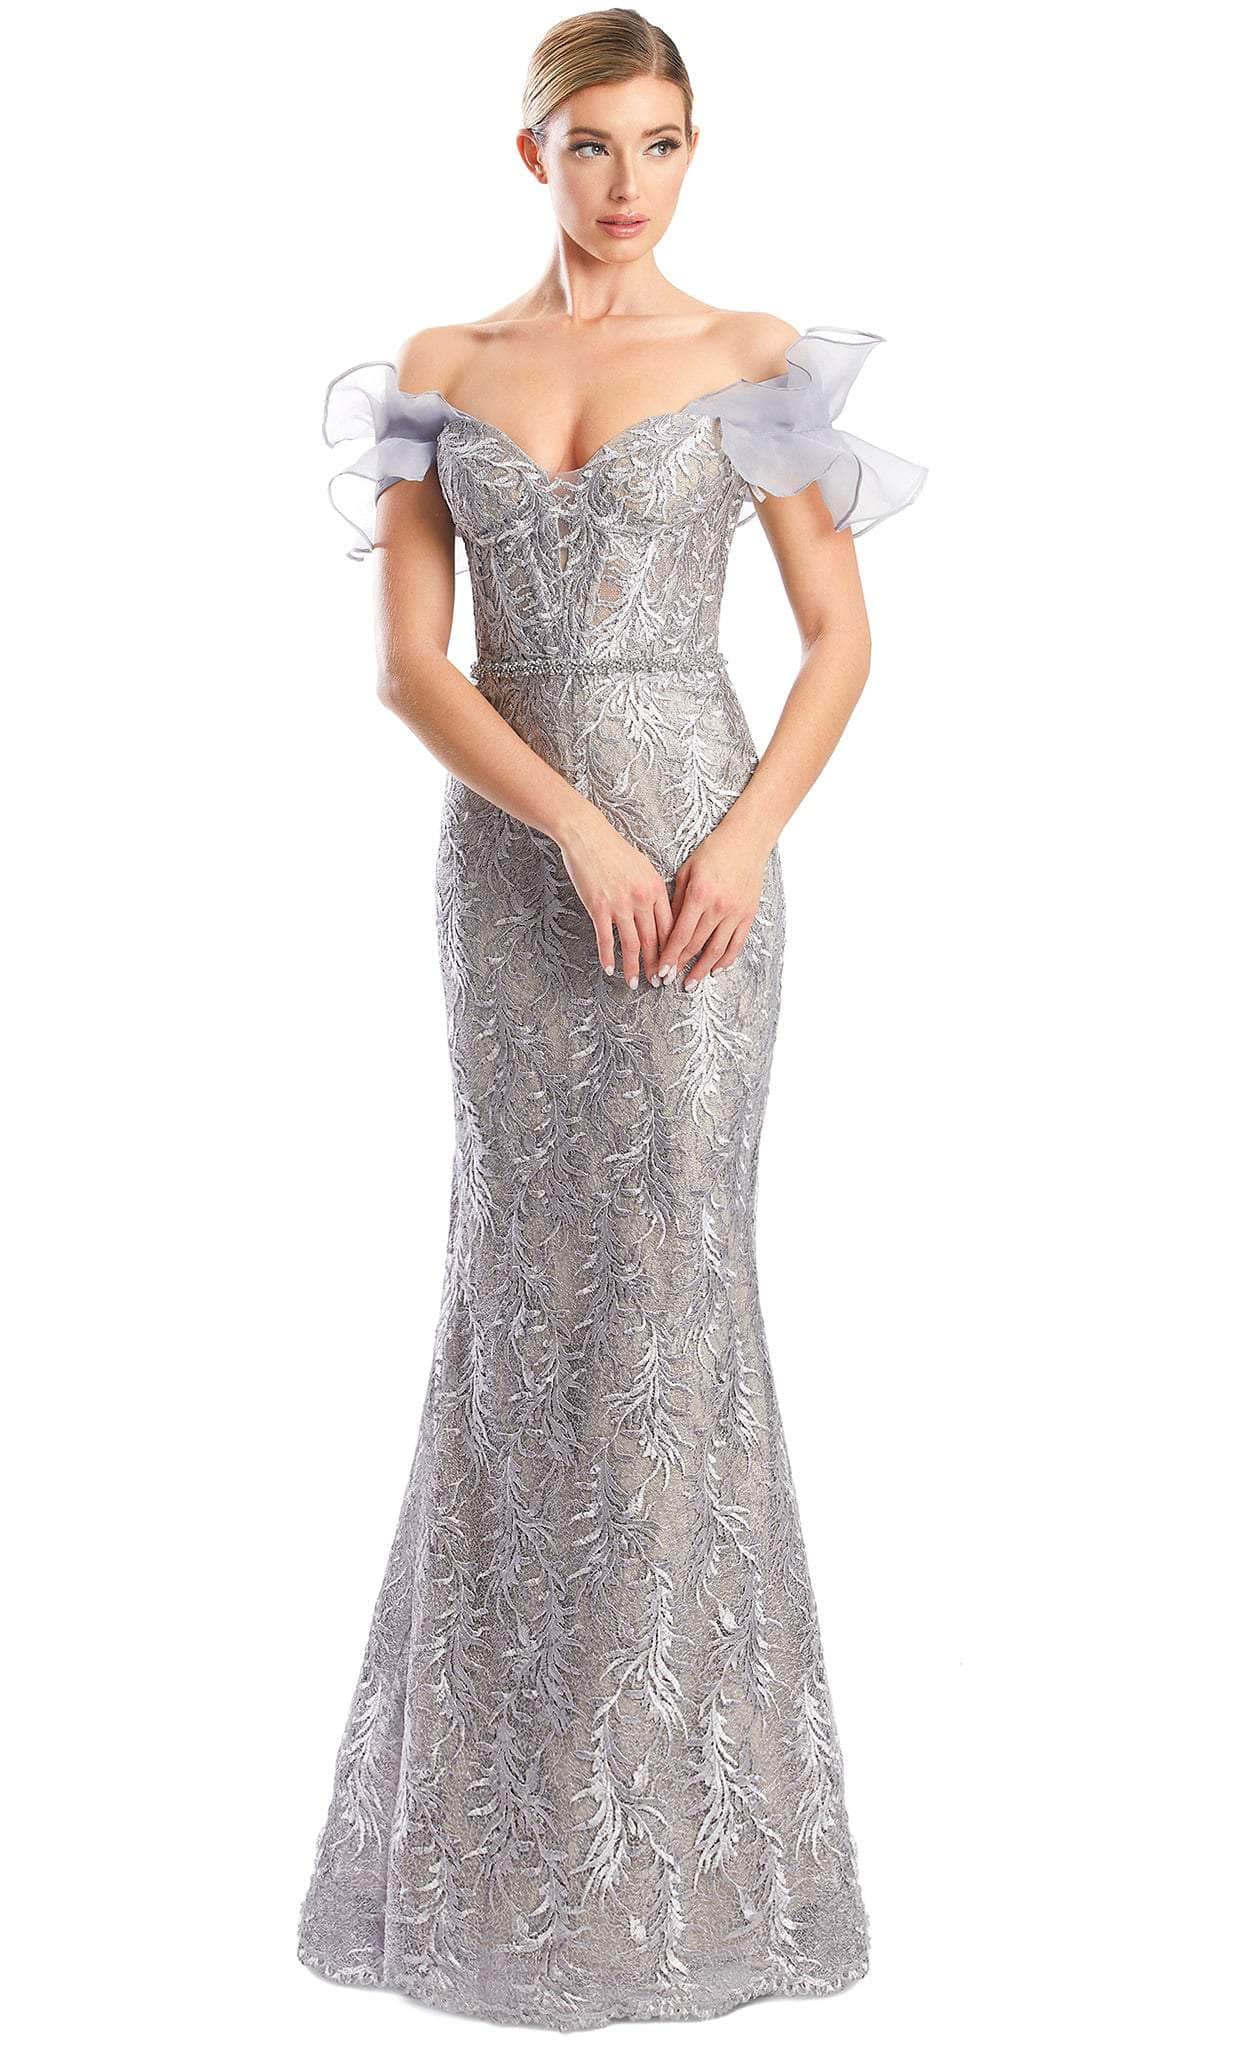 Alexander by Daymor 1774S23 - Ruffled Sleeve Sweetheart Lace Gown Evening Dresses 00 / Dove Grey